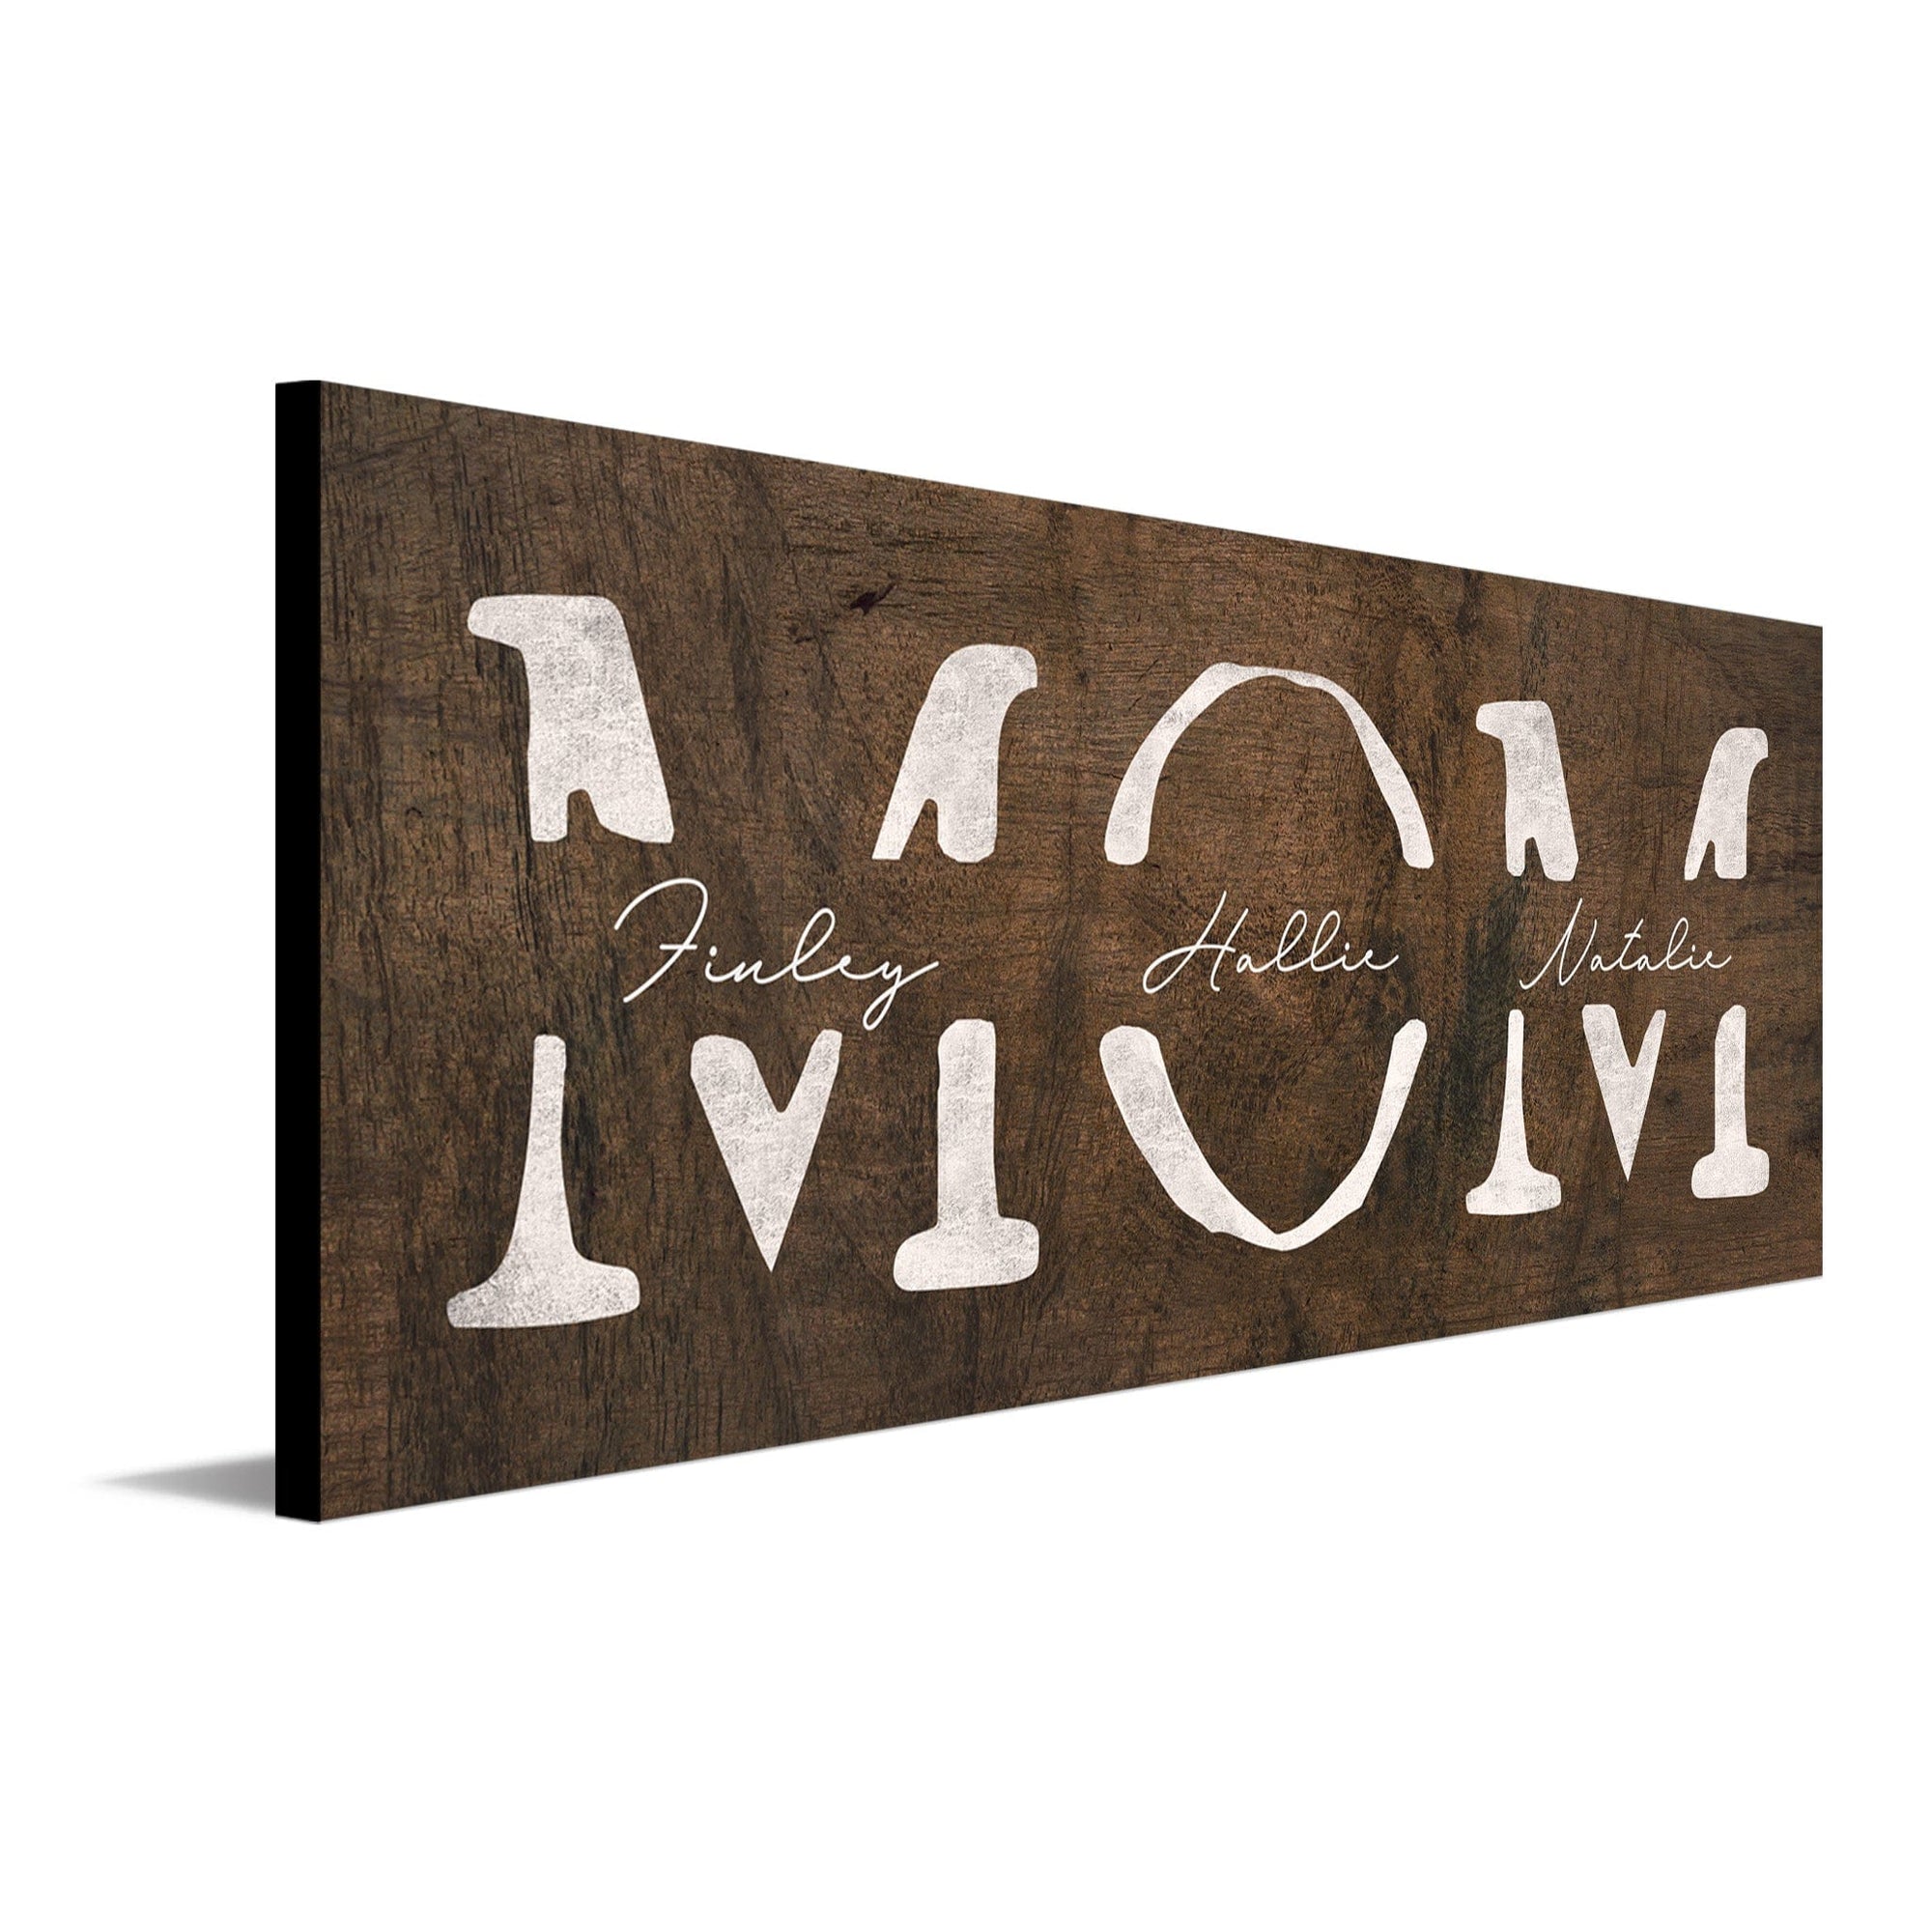 Personalized Wall Decor for Mom - Mother's Day Gift Idea